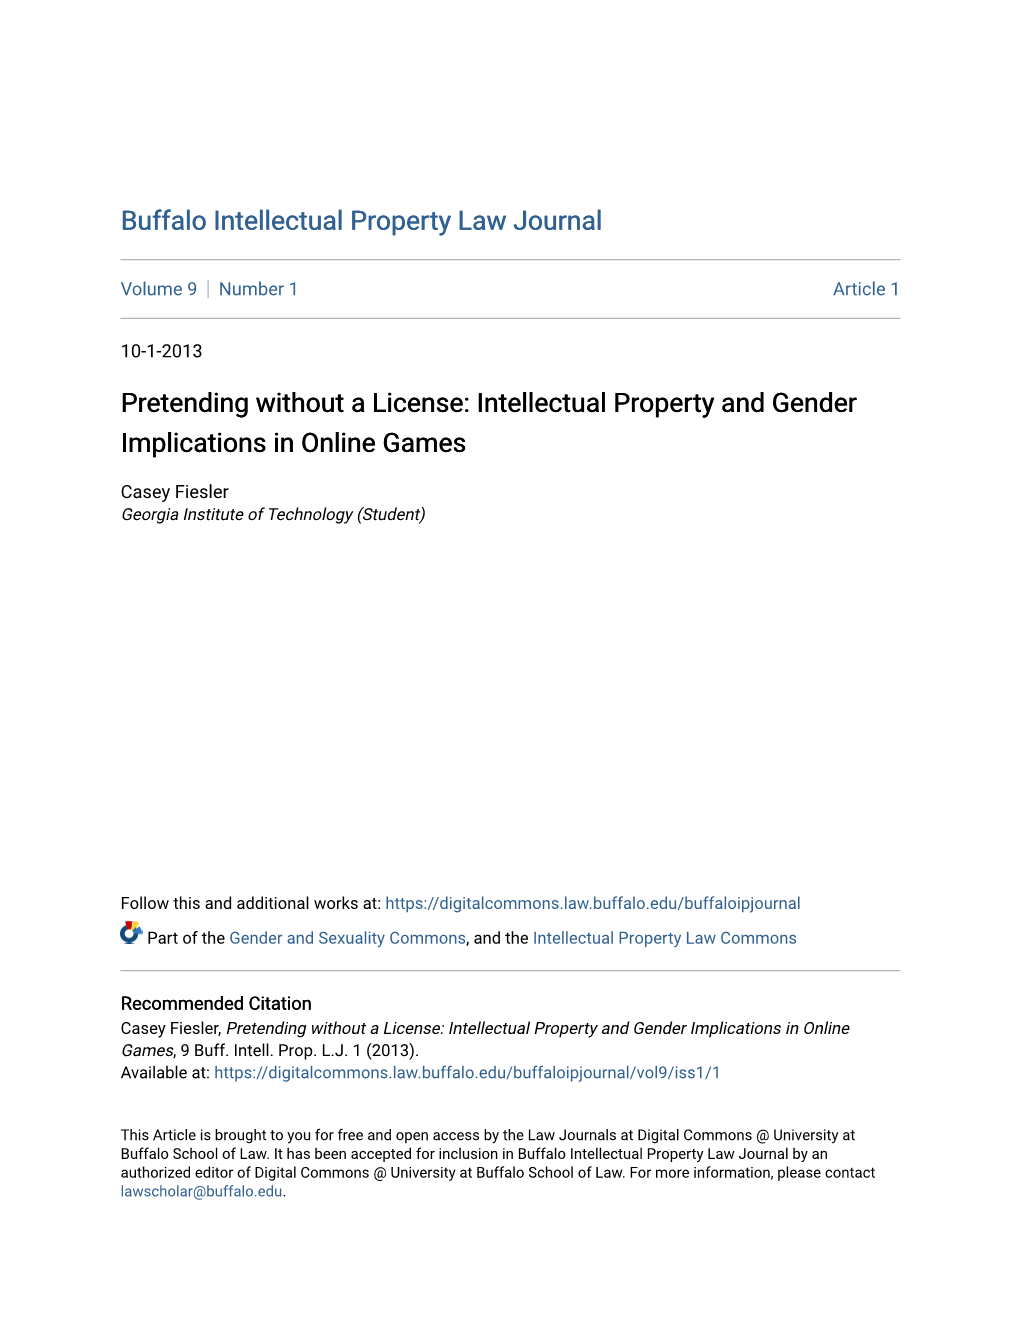 Intellectual Property and Gender Implications in Online Games